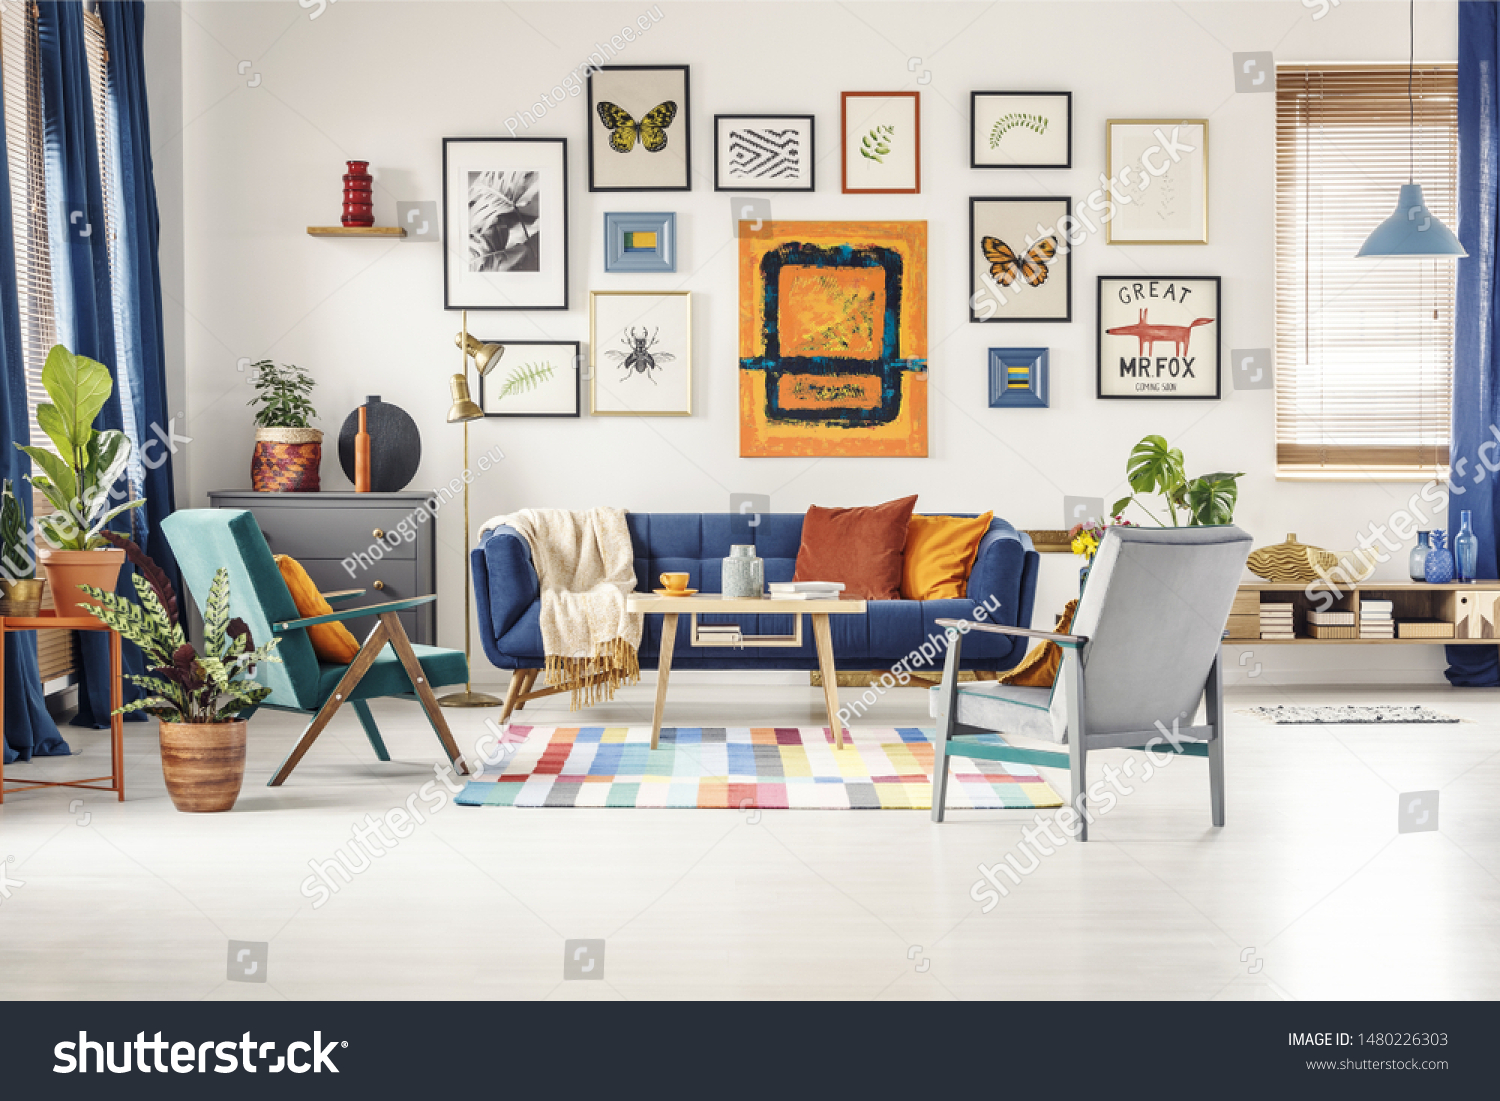 Simple posters gallery hanging on the wall in bright living room interior with blue sofa, two armchairs, fresh plants and wooden coffee table standing on colorful carpet #1480226303